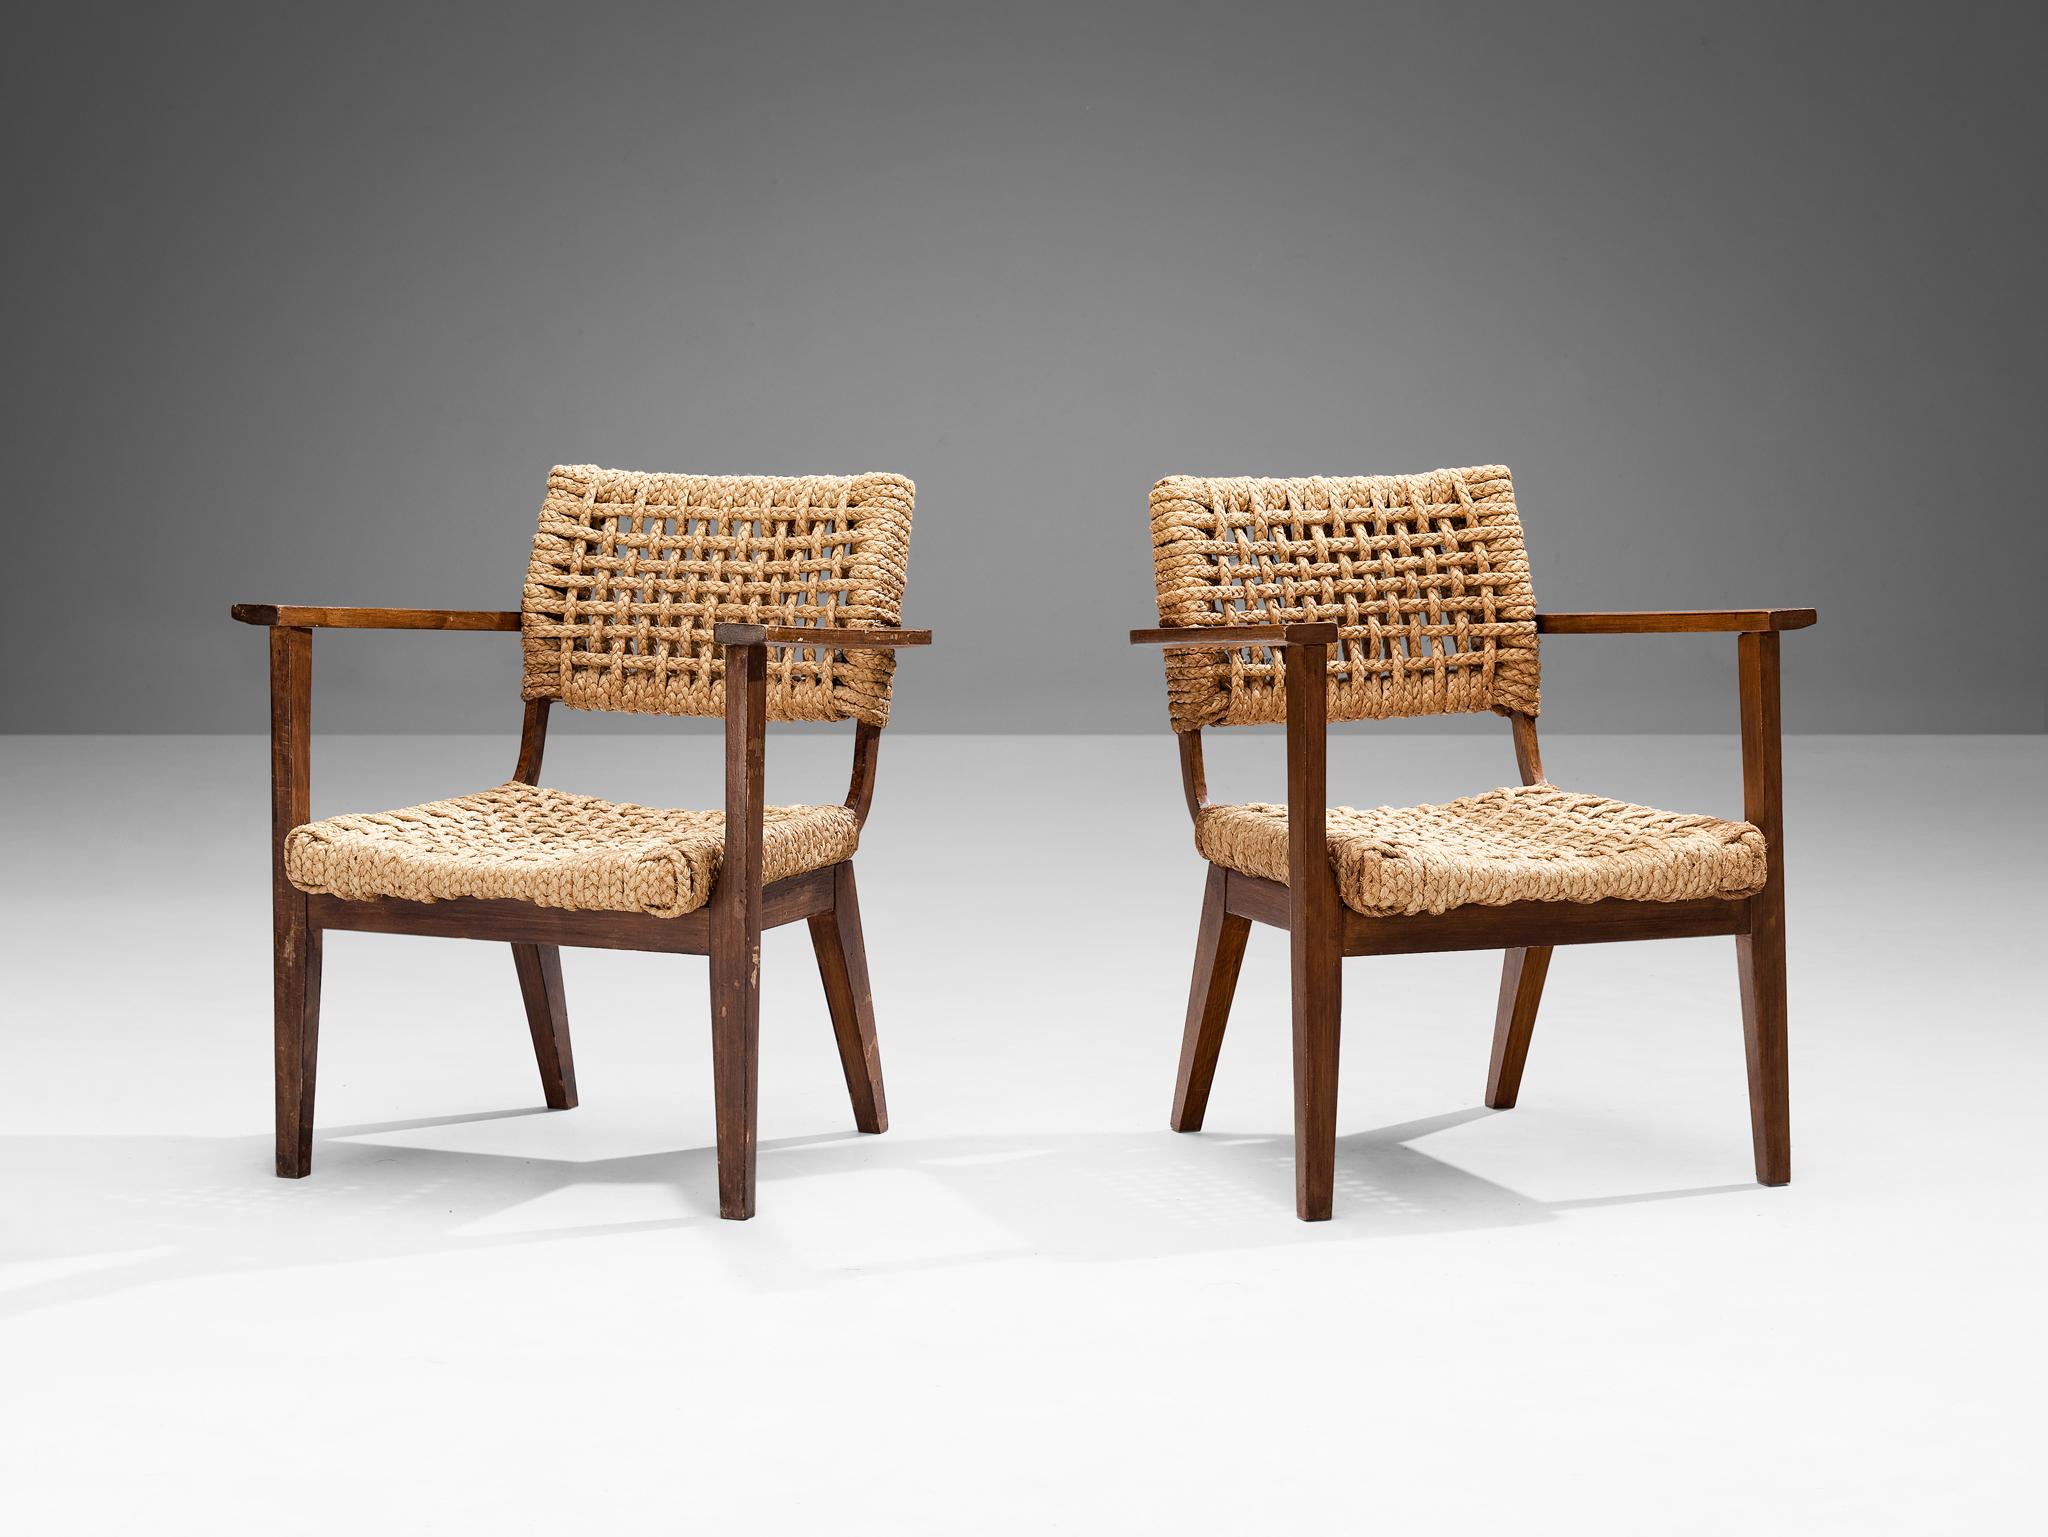 Adrien Audoux & Frida Minet for Vibo, pair of armchairs, stained beech, straw, France, 1950s

Pair of armchairs designed by the duo Adrien Audoux and Frida Minet. The seating and backrest are made of woven hemp from the abaca plant which is close